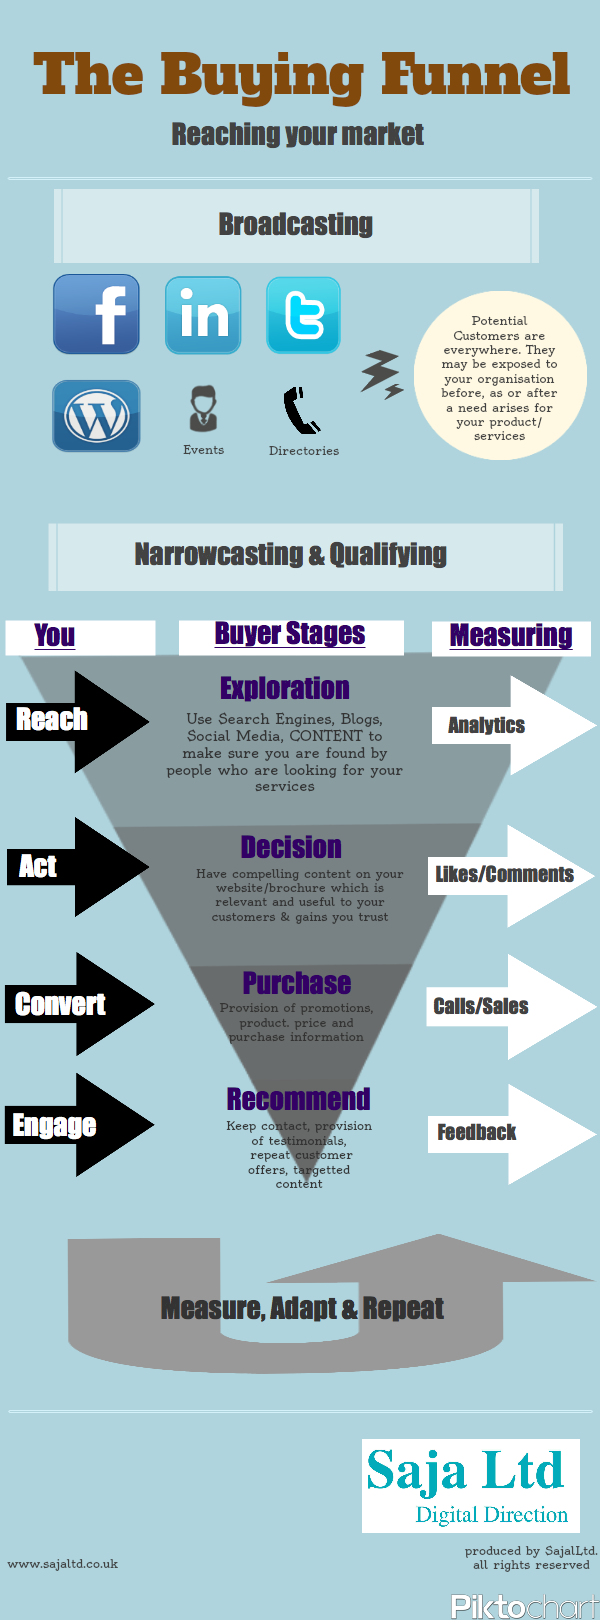 A marketing purchase decision funnel